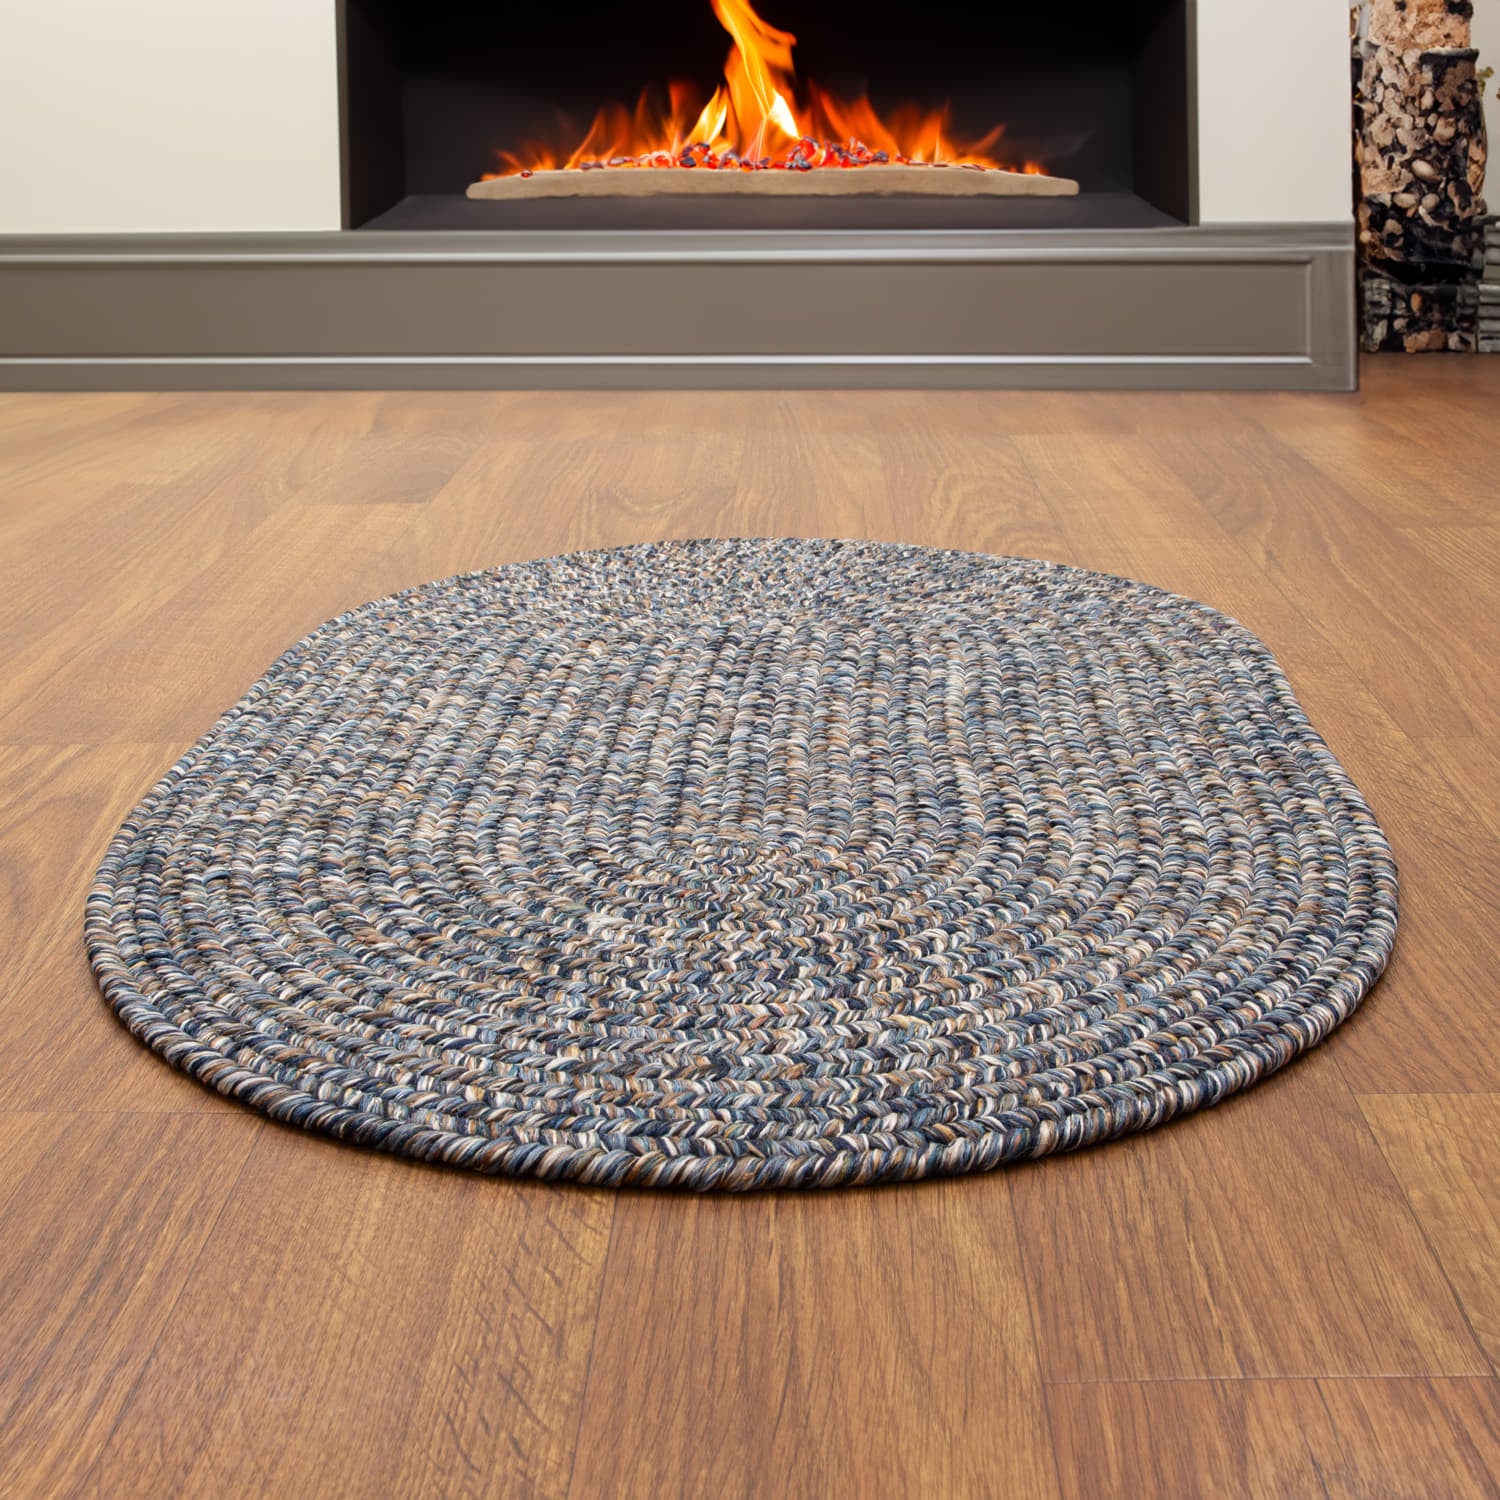 5' X 7' braided oval area rug for living room indoor outdoor oval rugs